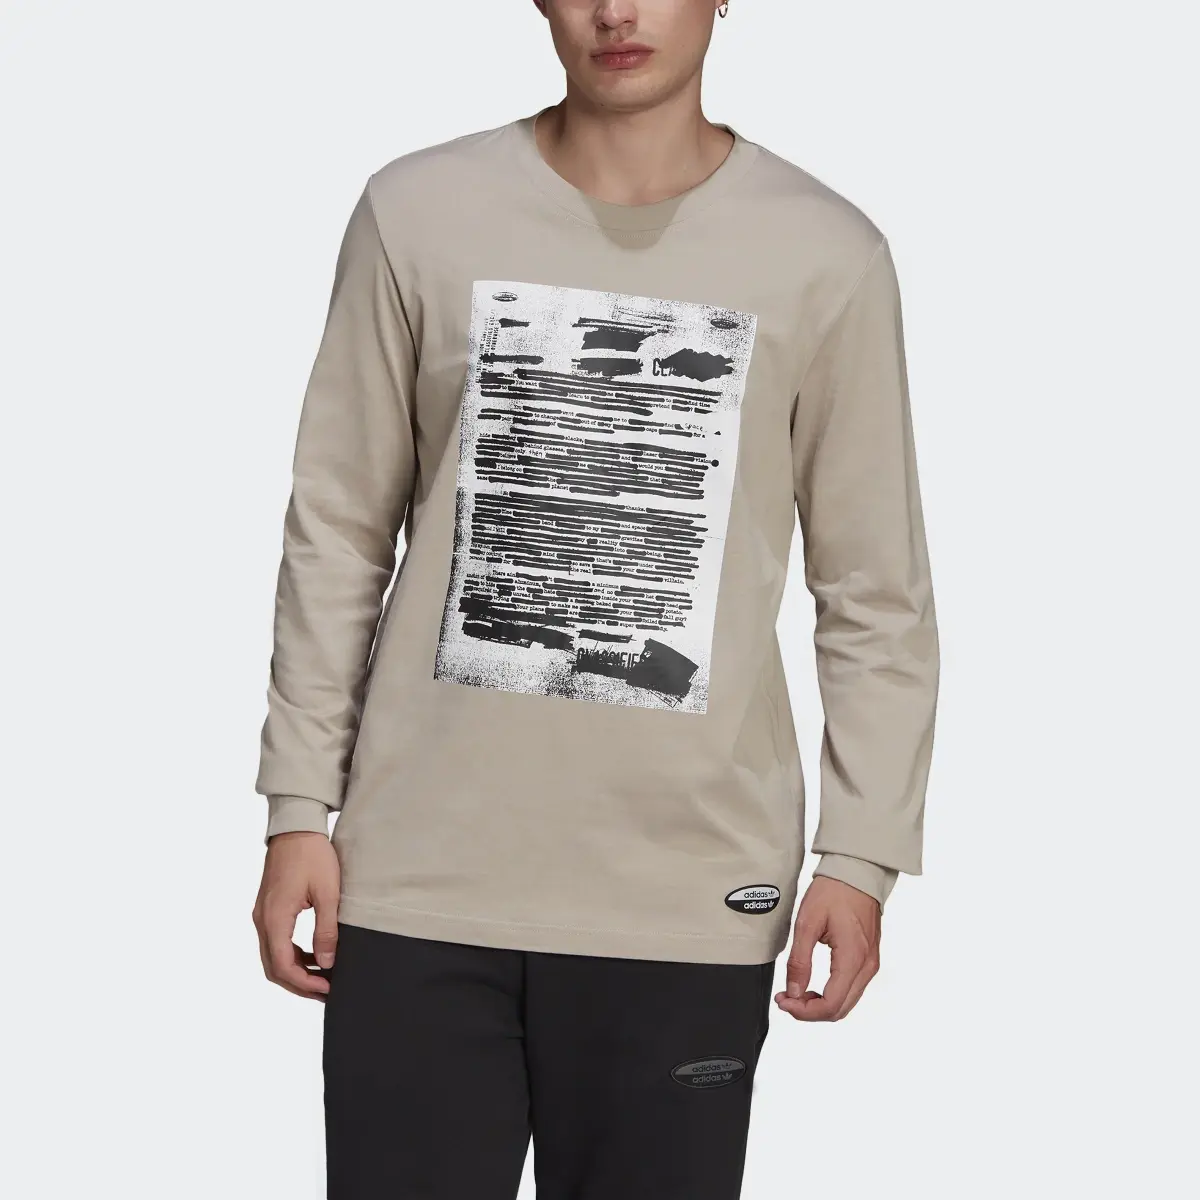 Adidas R.Y.V. Graphic Long-Sleeve Top. 1